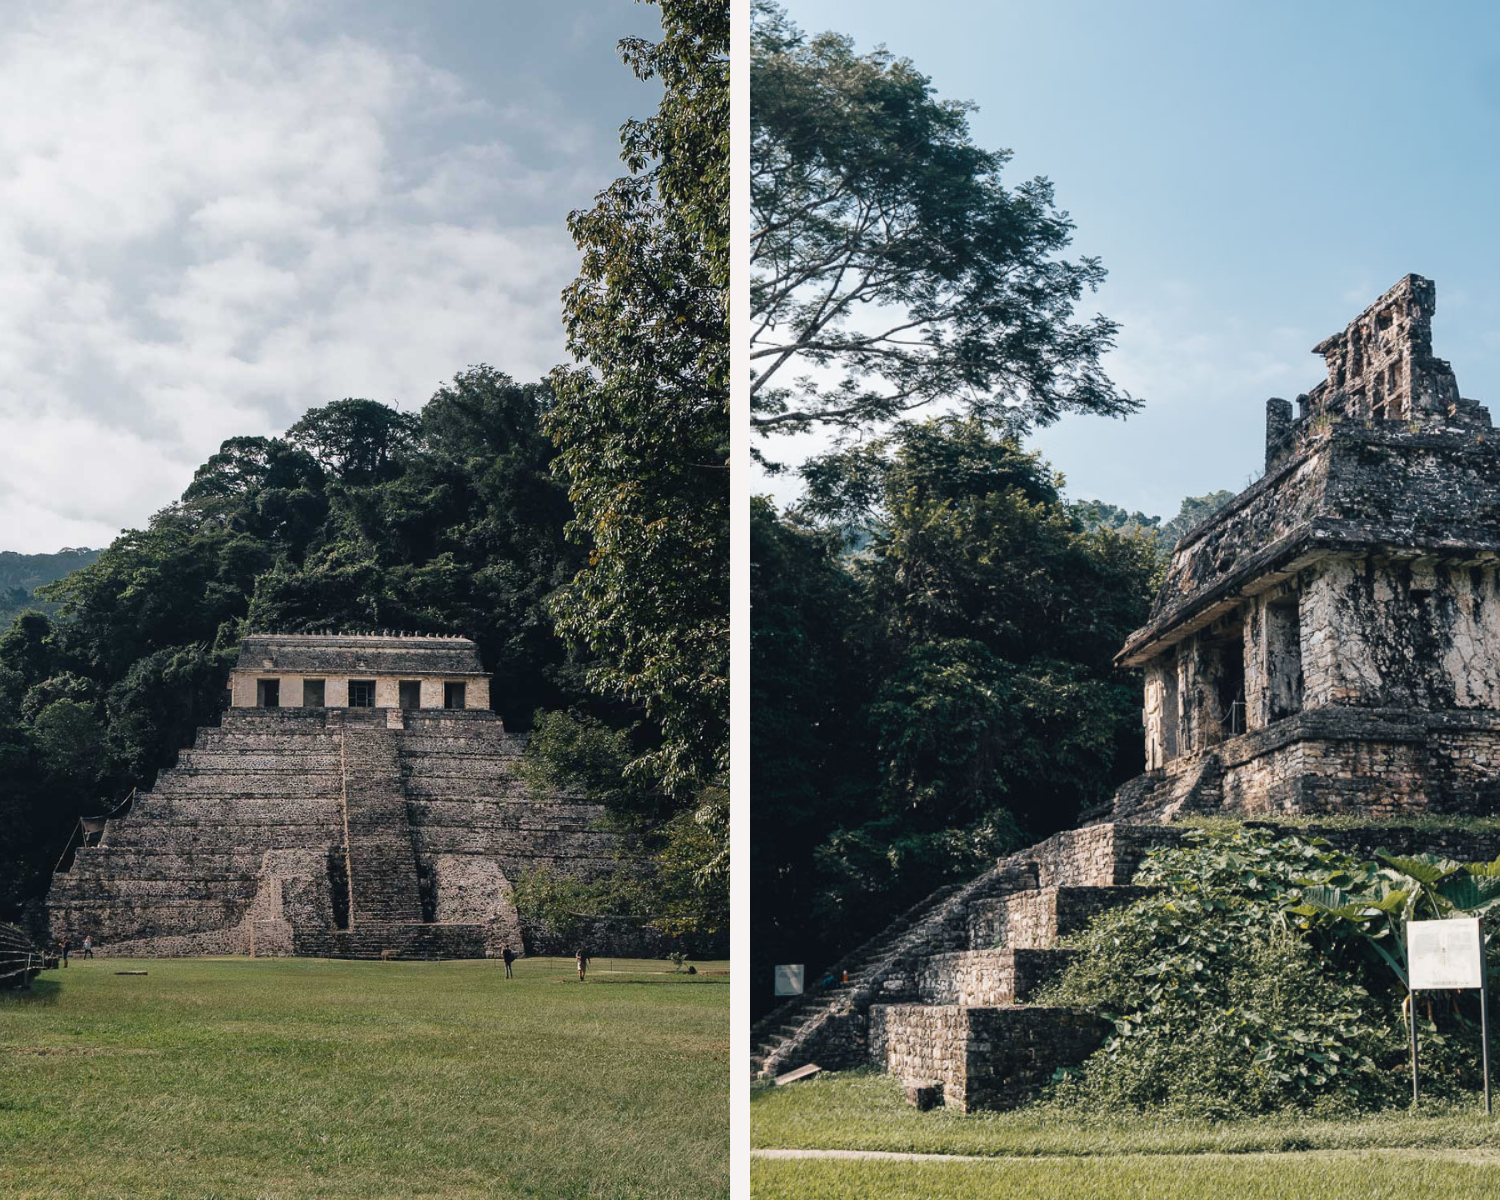 The archaeological site of Palenque